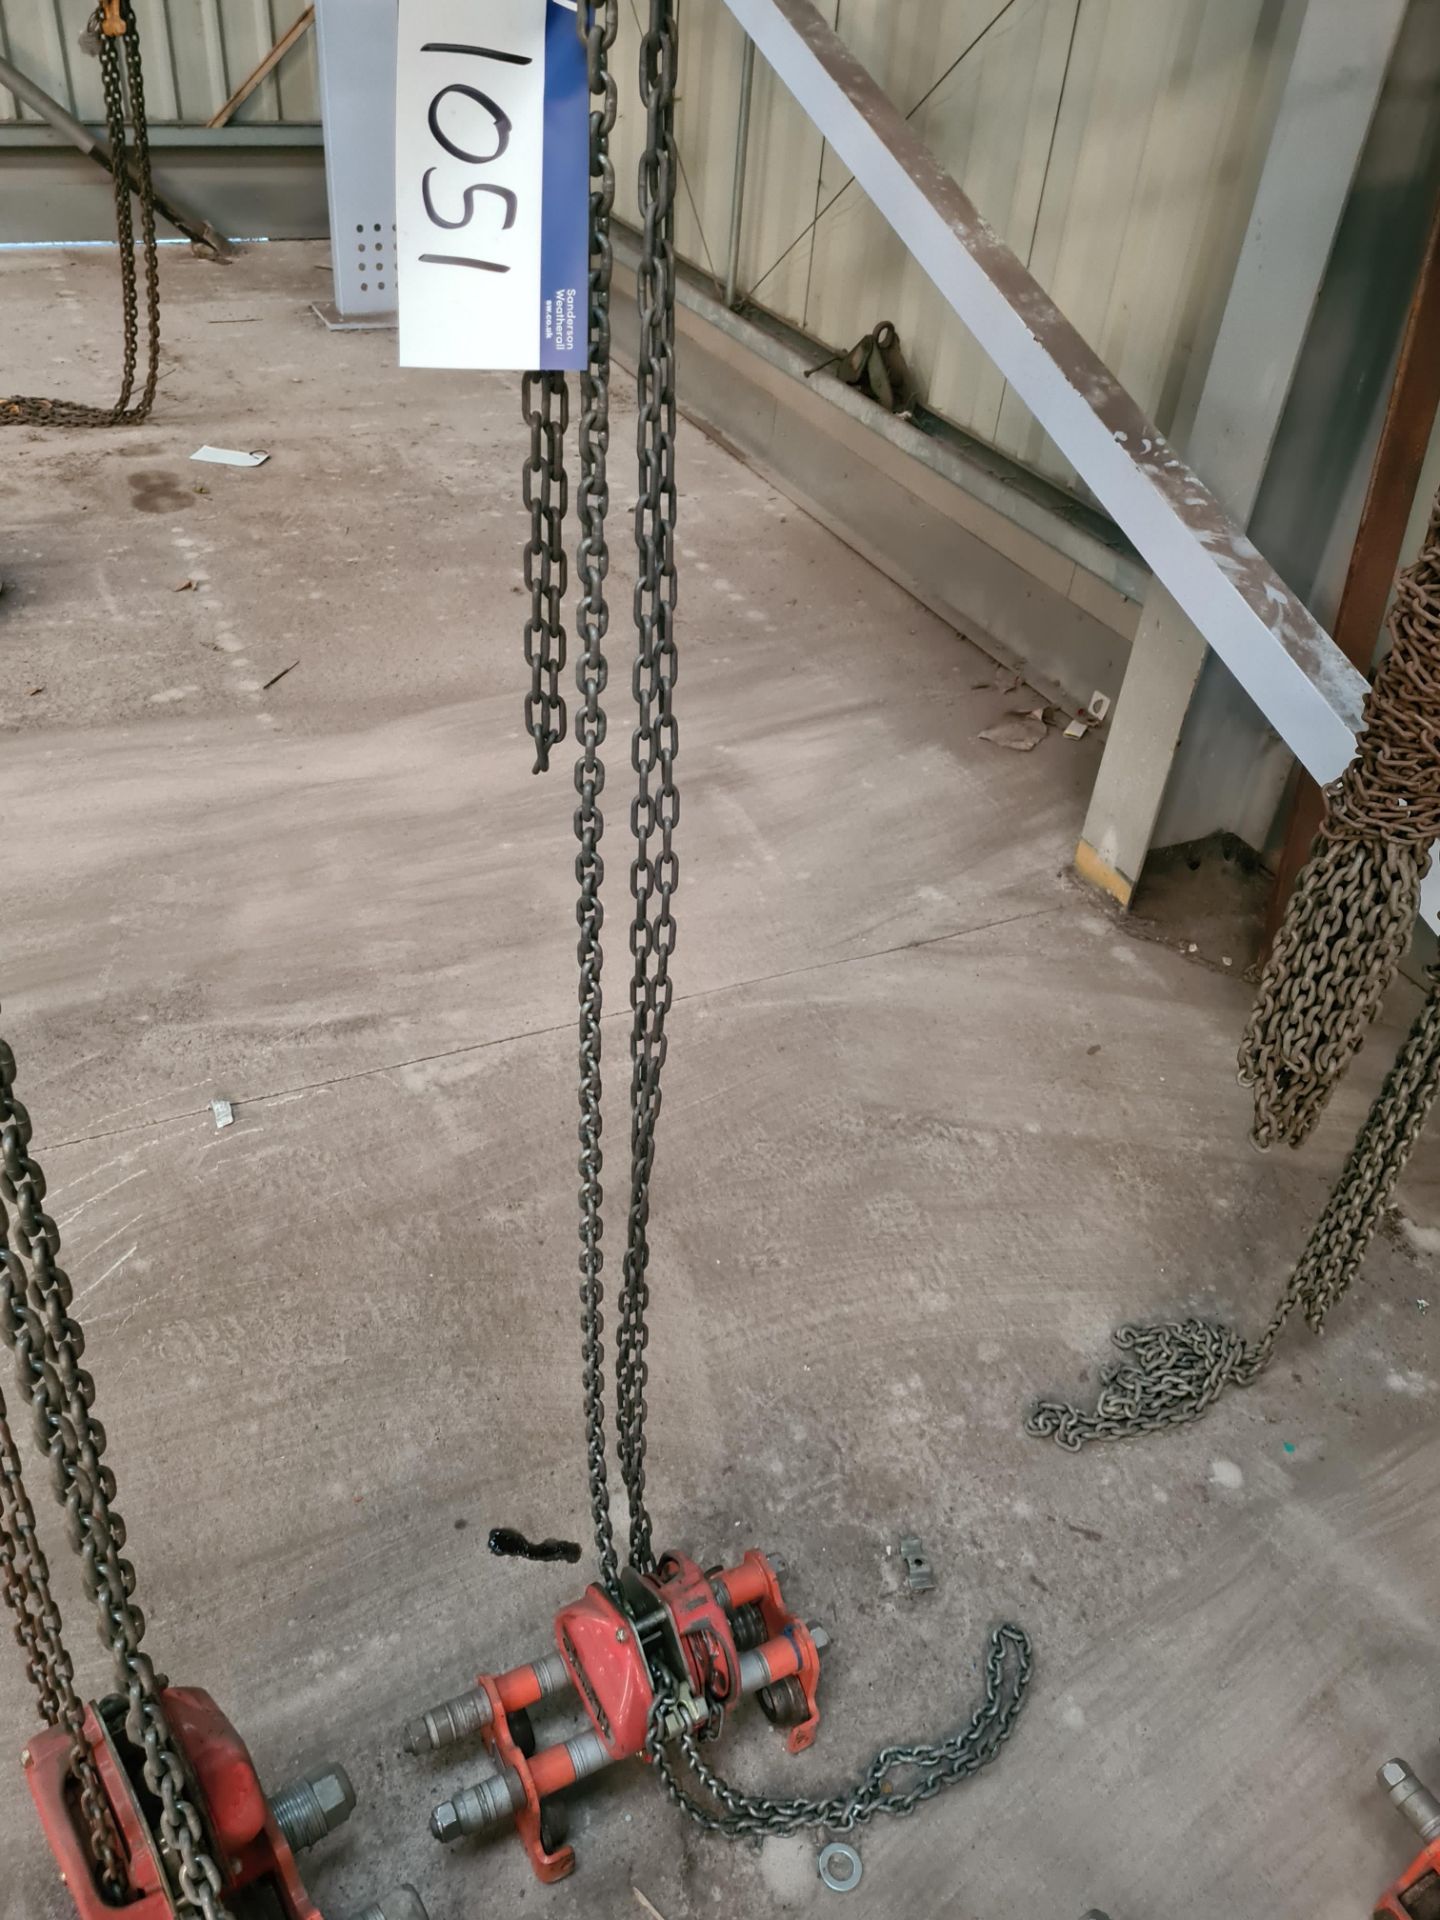 1051 Hackett WH-C4 Chain Hoist, year of manufacture 2019, SWL 1 ton, with Hackett WH-PT Girder